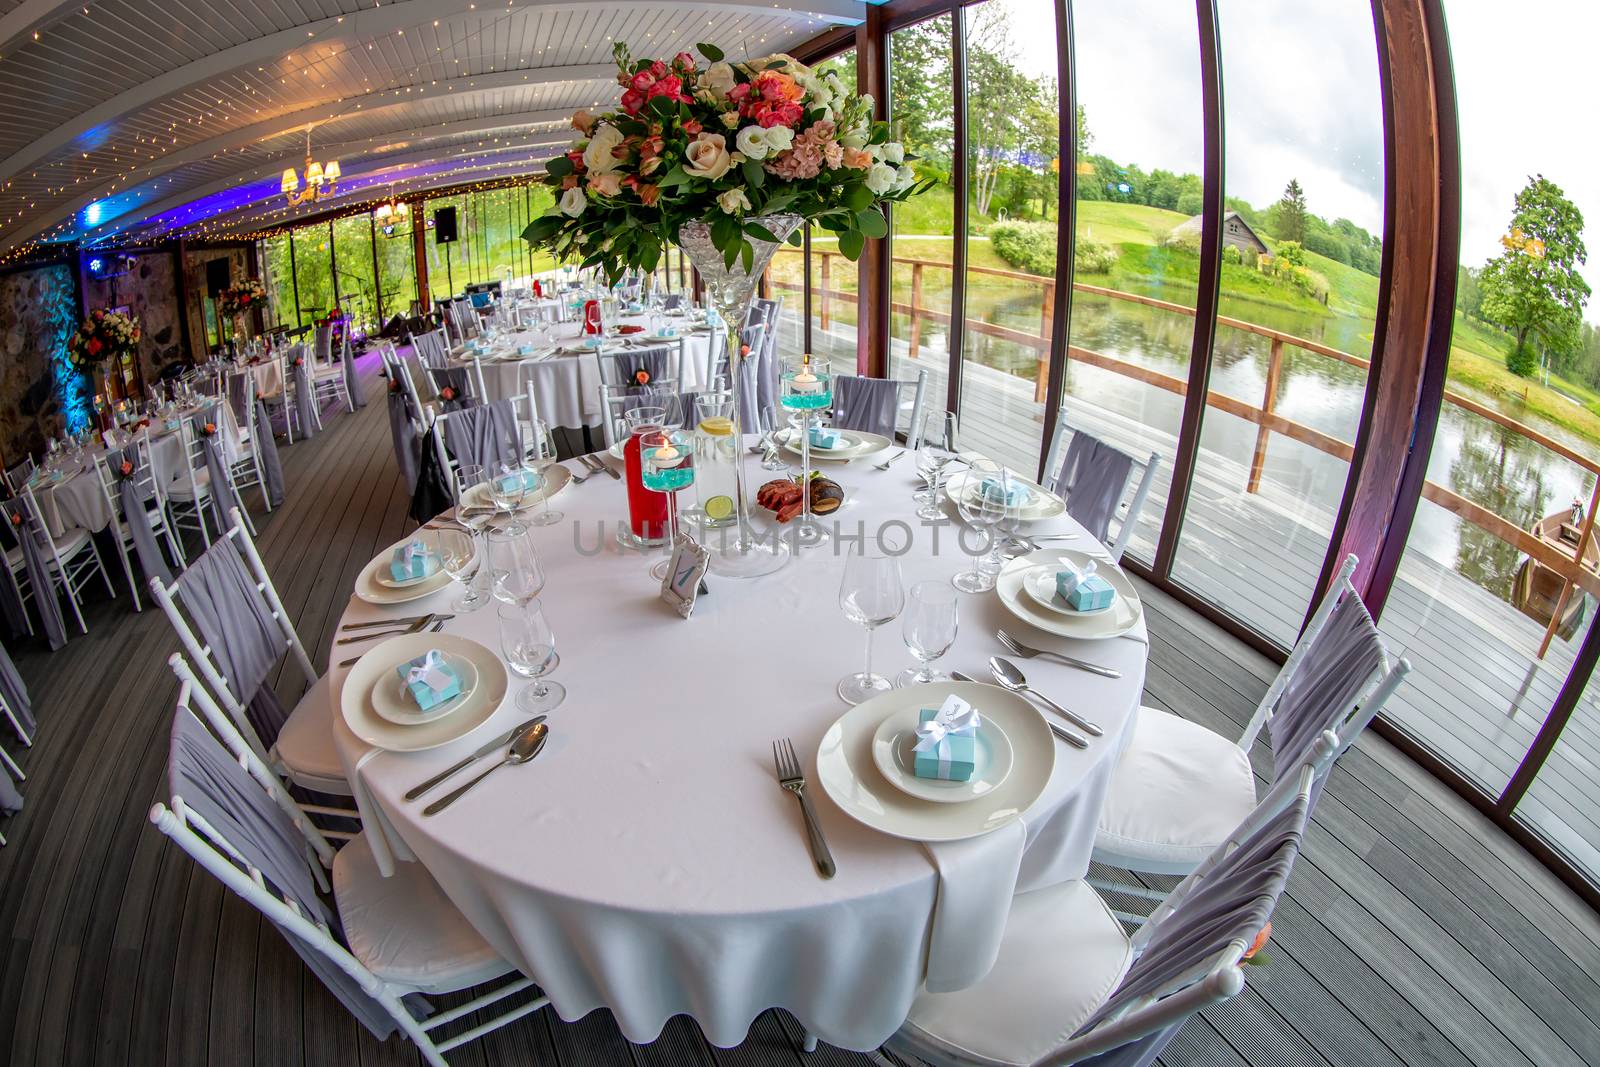 Table setting with handmade gift box on plate, bouquet of flowers, glasses, forks, spoons and knives for wedding reception. Guest tables in luxury decorated wedding banquet room. Shot with fisheye lens. 